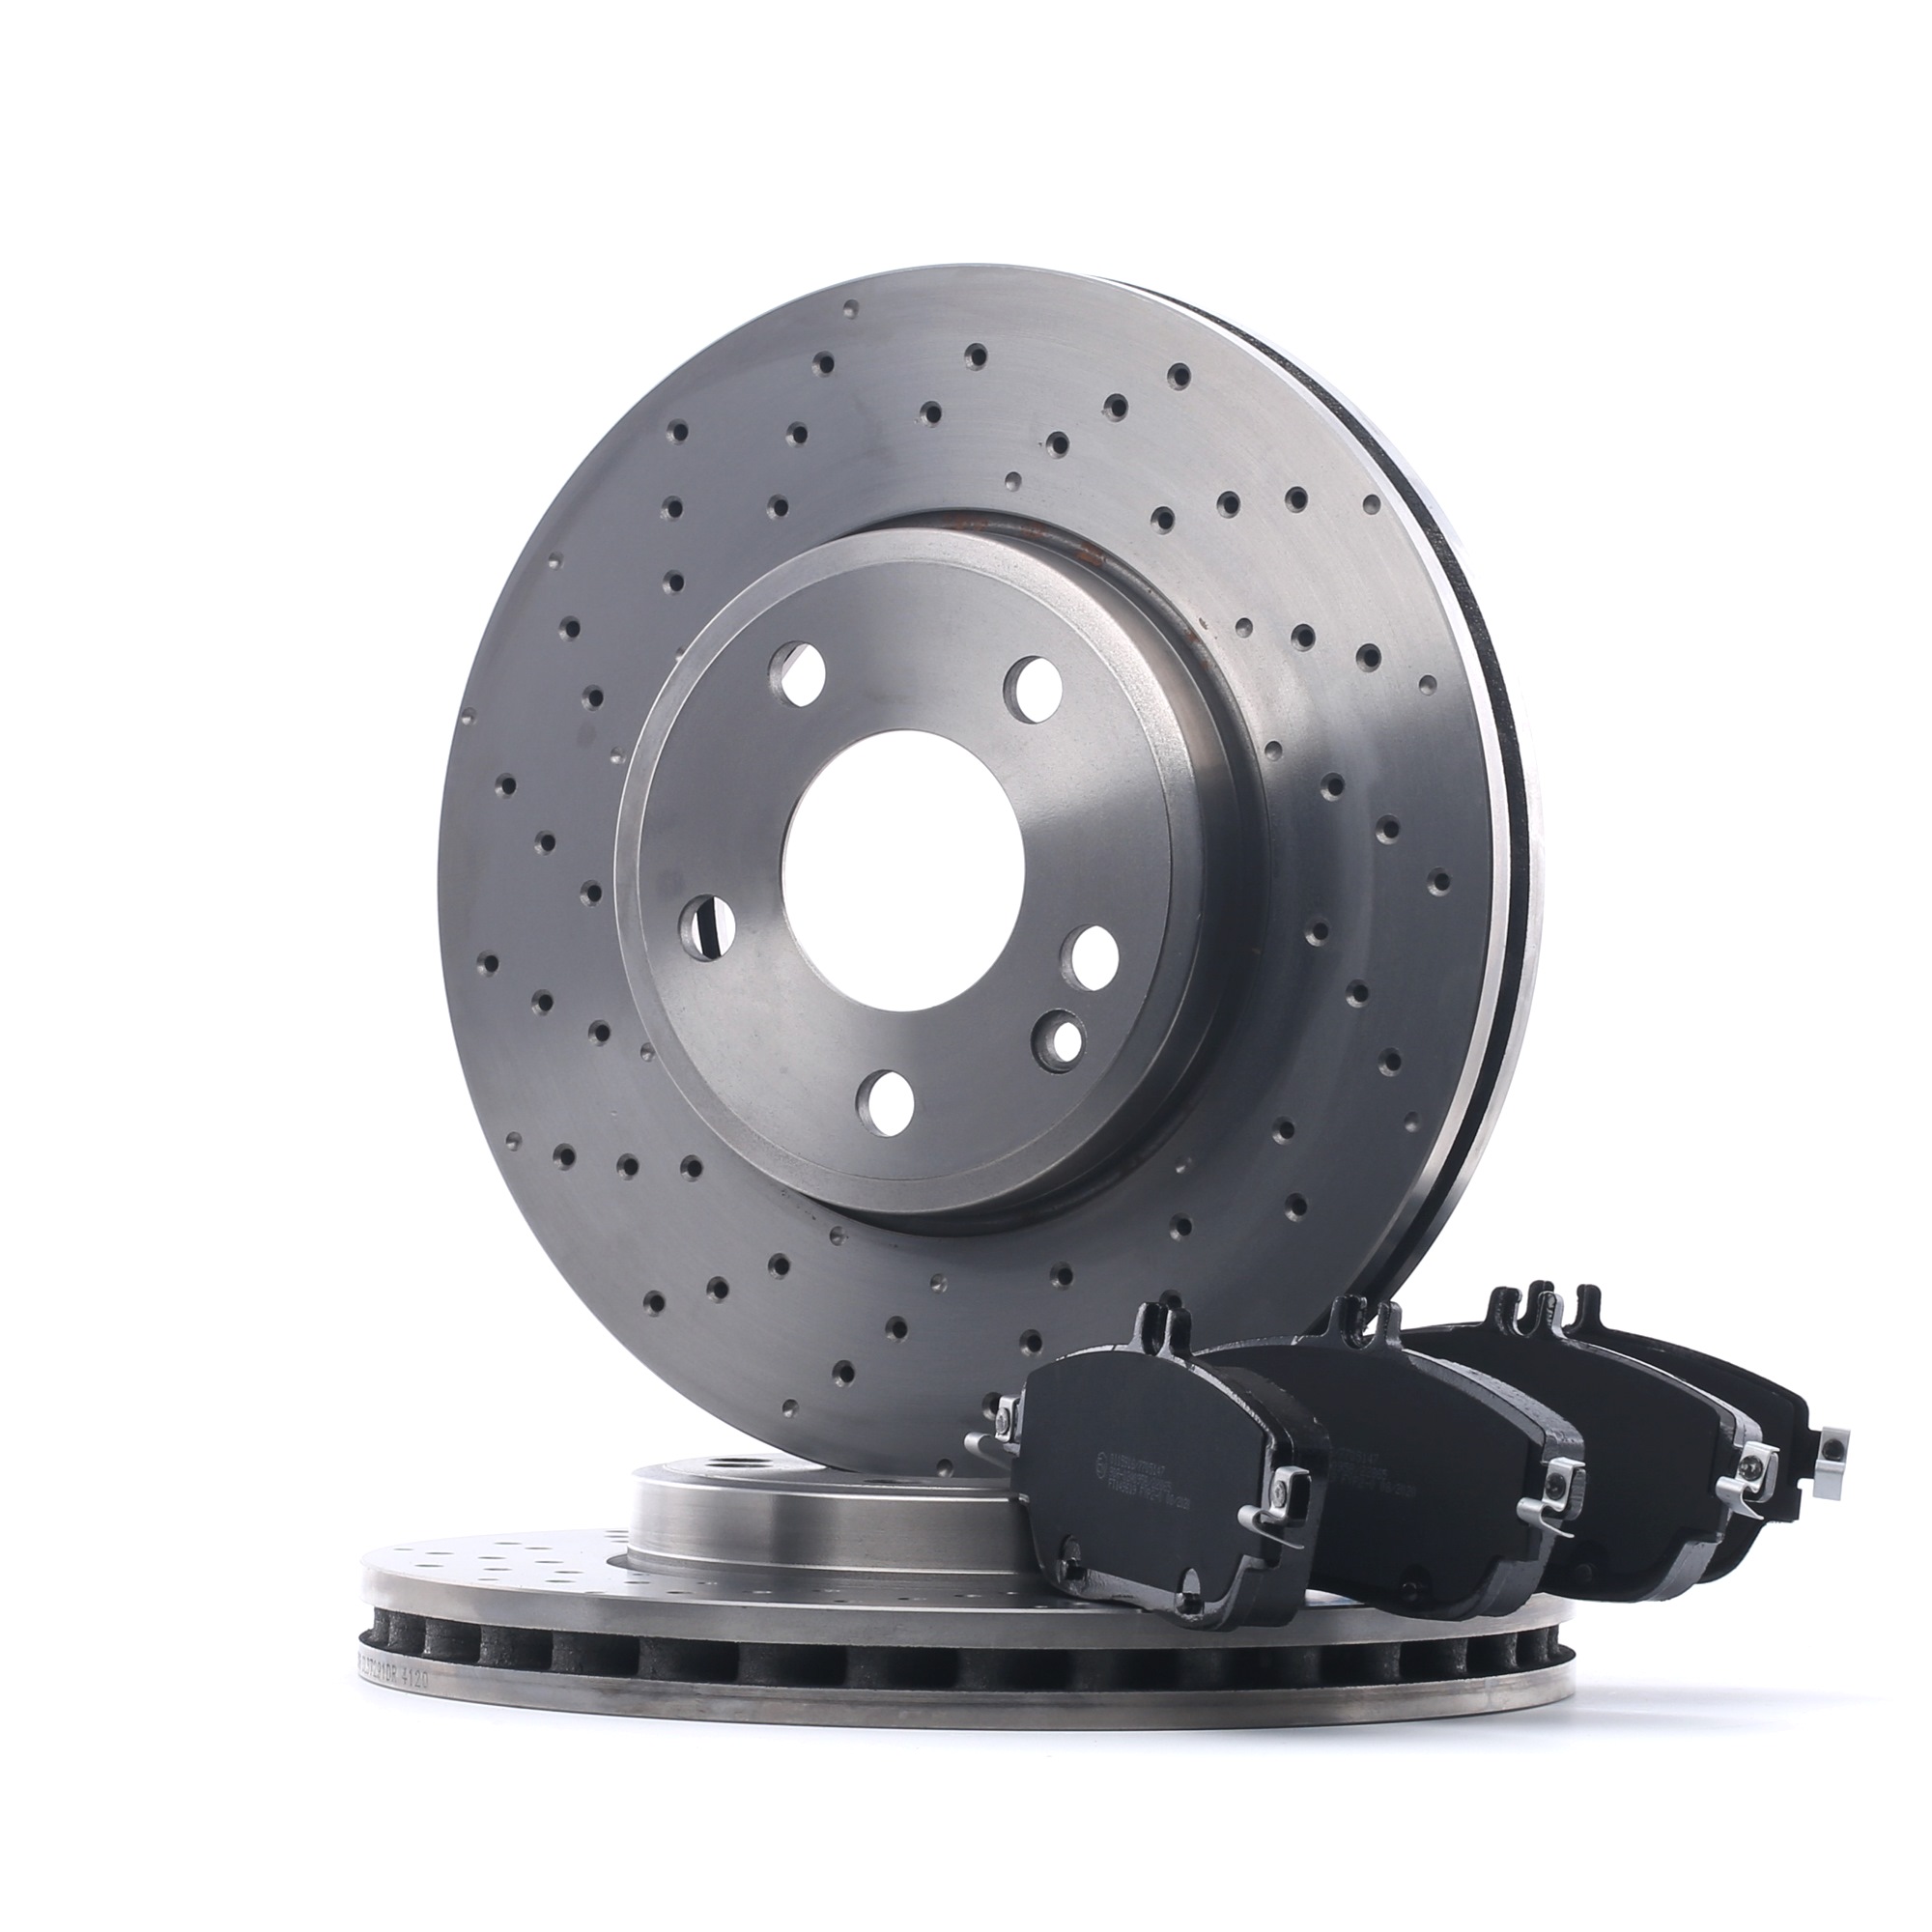 STARK SKBK-10990401 Brake discs and pads set Front Axle, perforated/vented, prepared for wear indicator, excl. wear warning contact